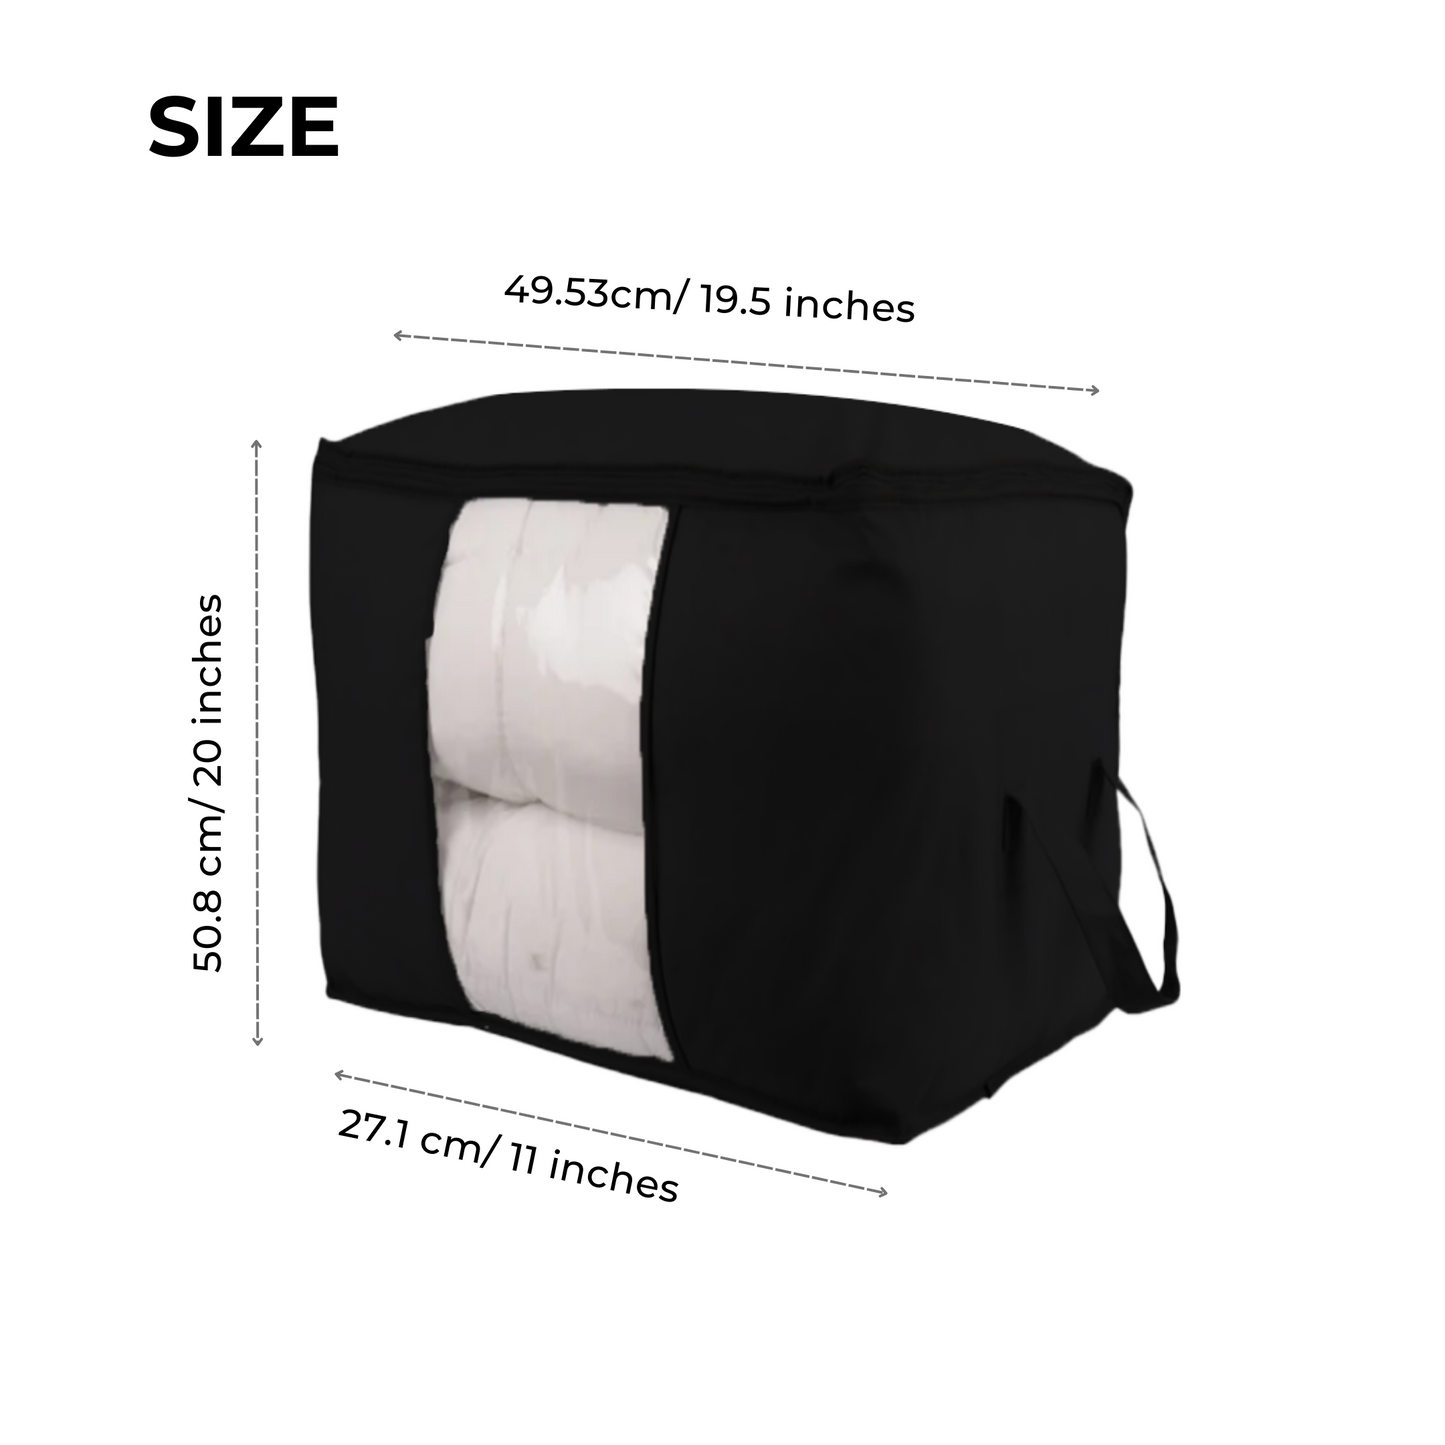 Qoolish Pack of 1 Storage Bag – Sort and Store in Style (Available in 3 Colors)